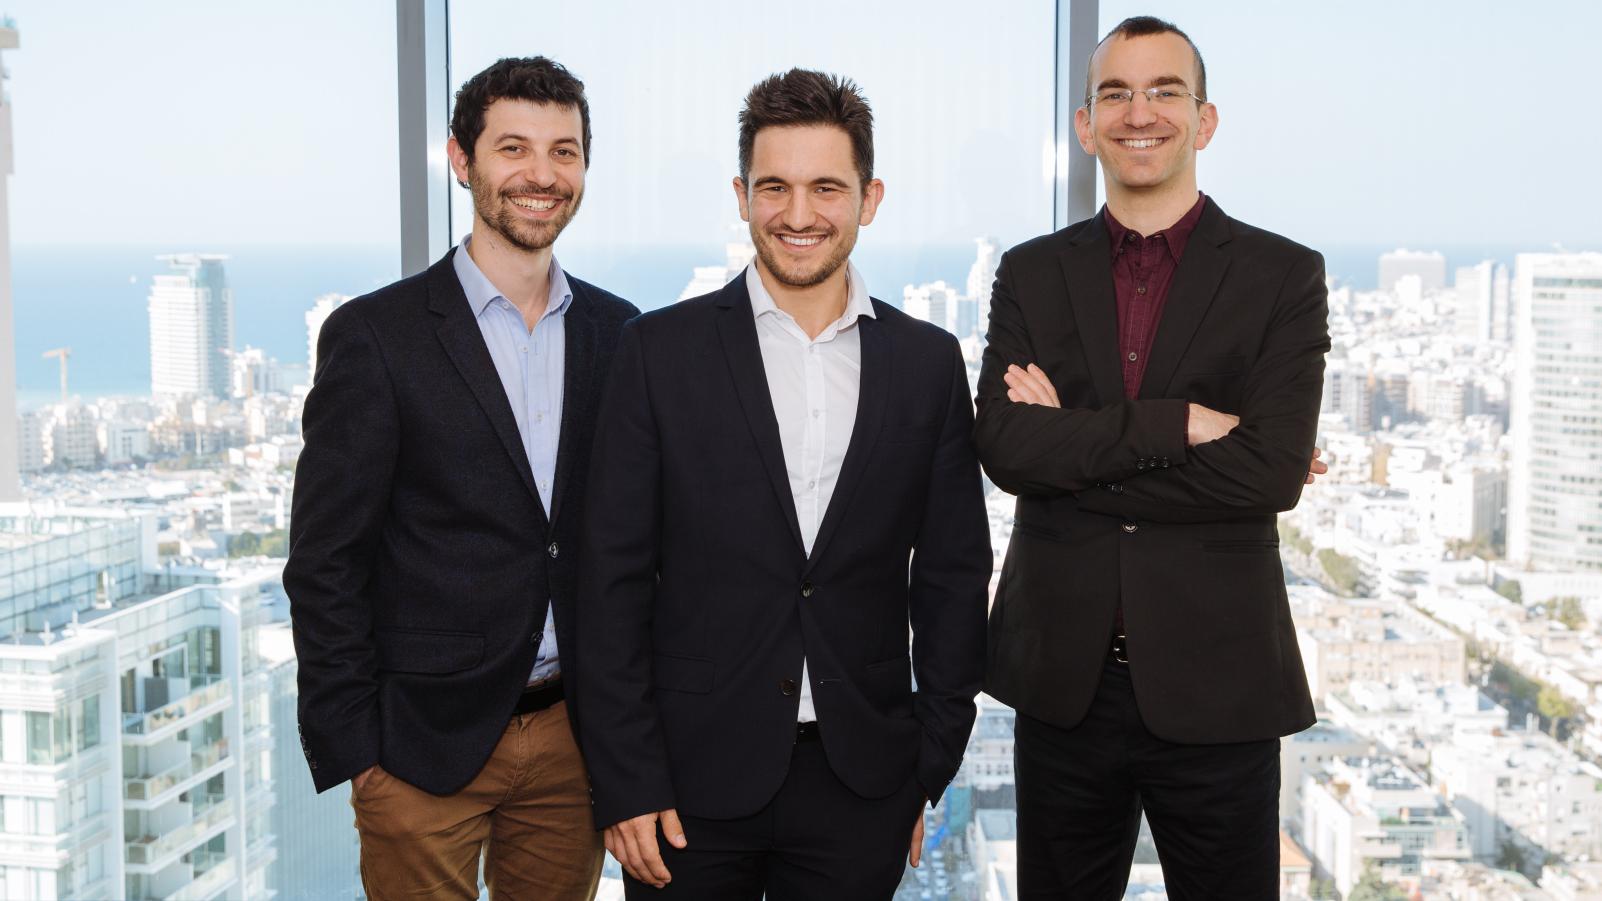 The Aidoc team, from left, Michael Braginsky, Elad Walach and Guy Reiner. (Photo: courtesy)